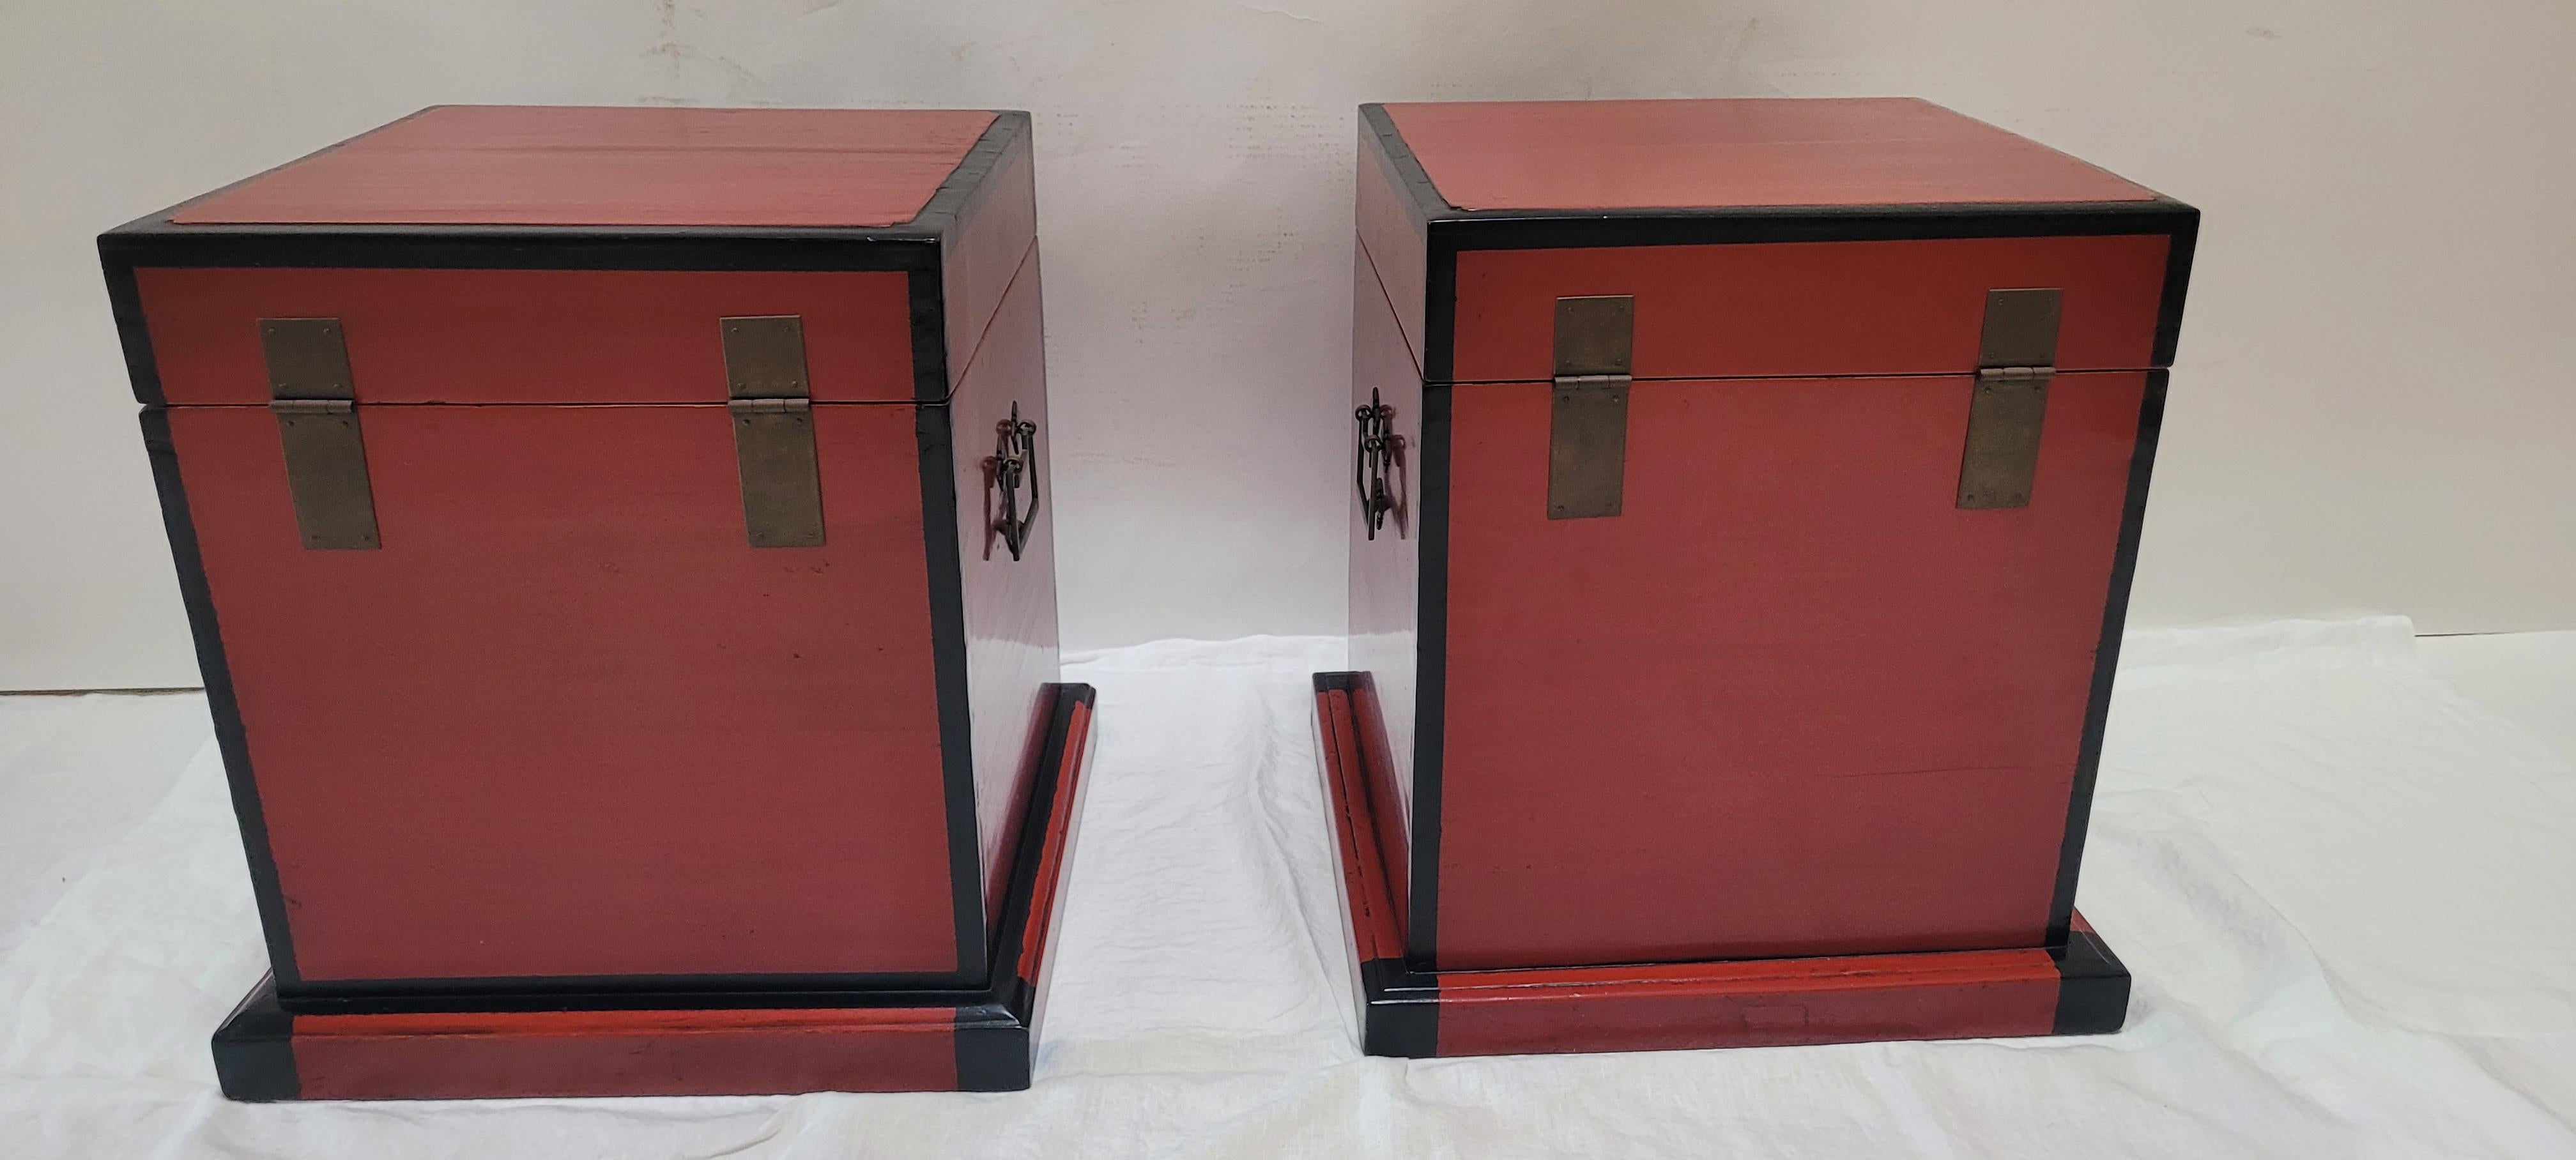 Pair of Red Lacquer Boxes	
These square trunks have a base and are decorated with square metal hardware on the front.  They would have been part of a lady’s dowry and are therefore lacquered in the color red which signifies luck, double happiness